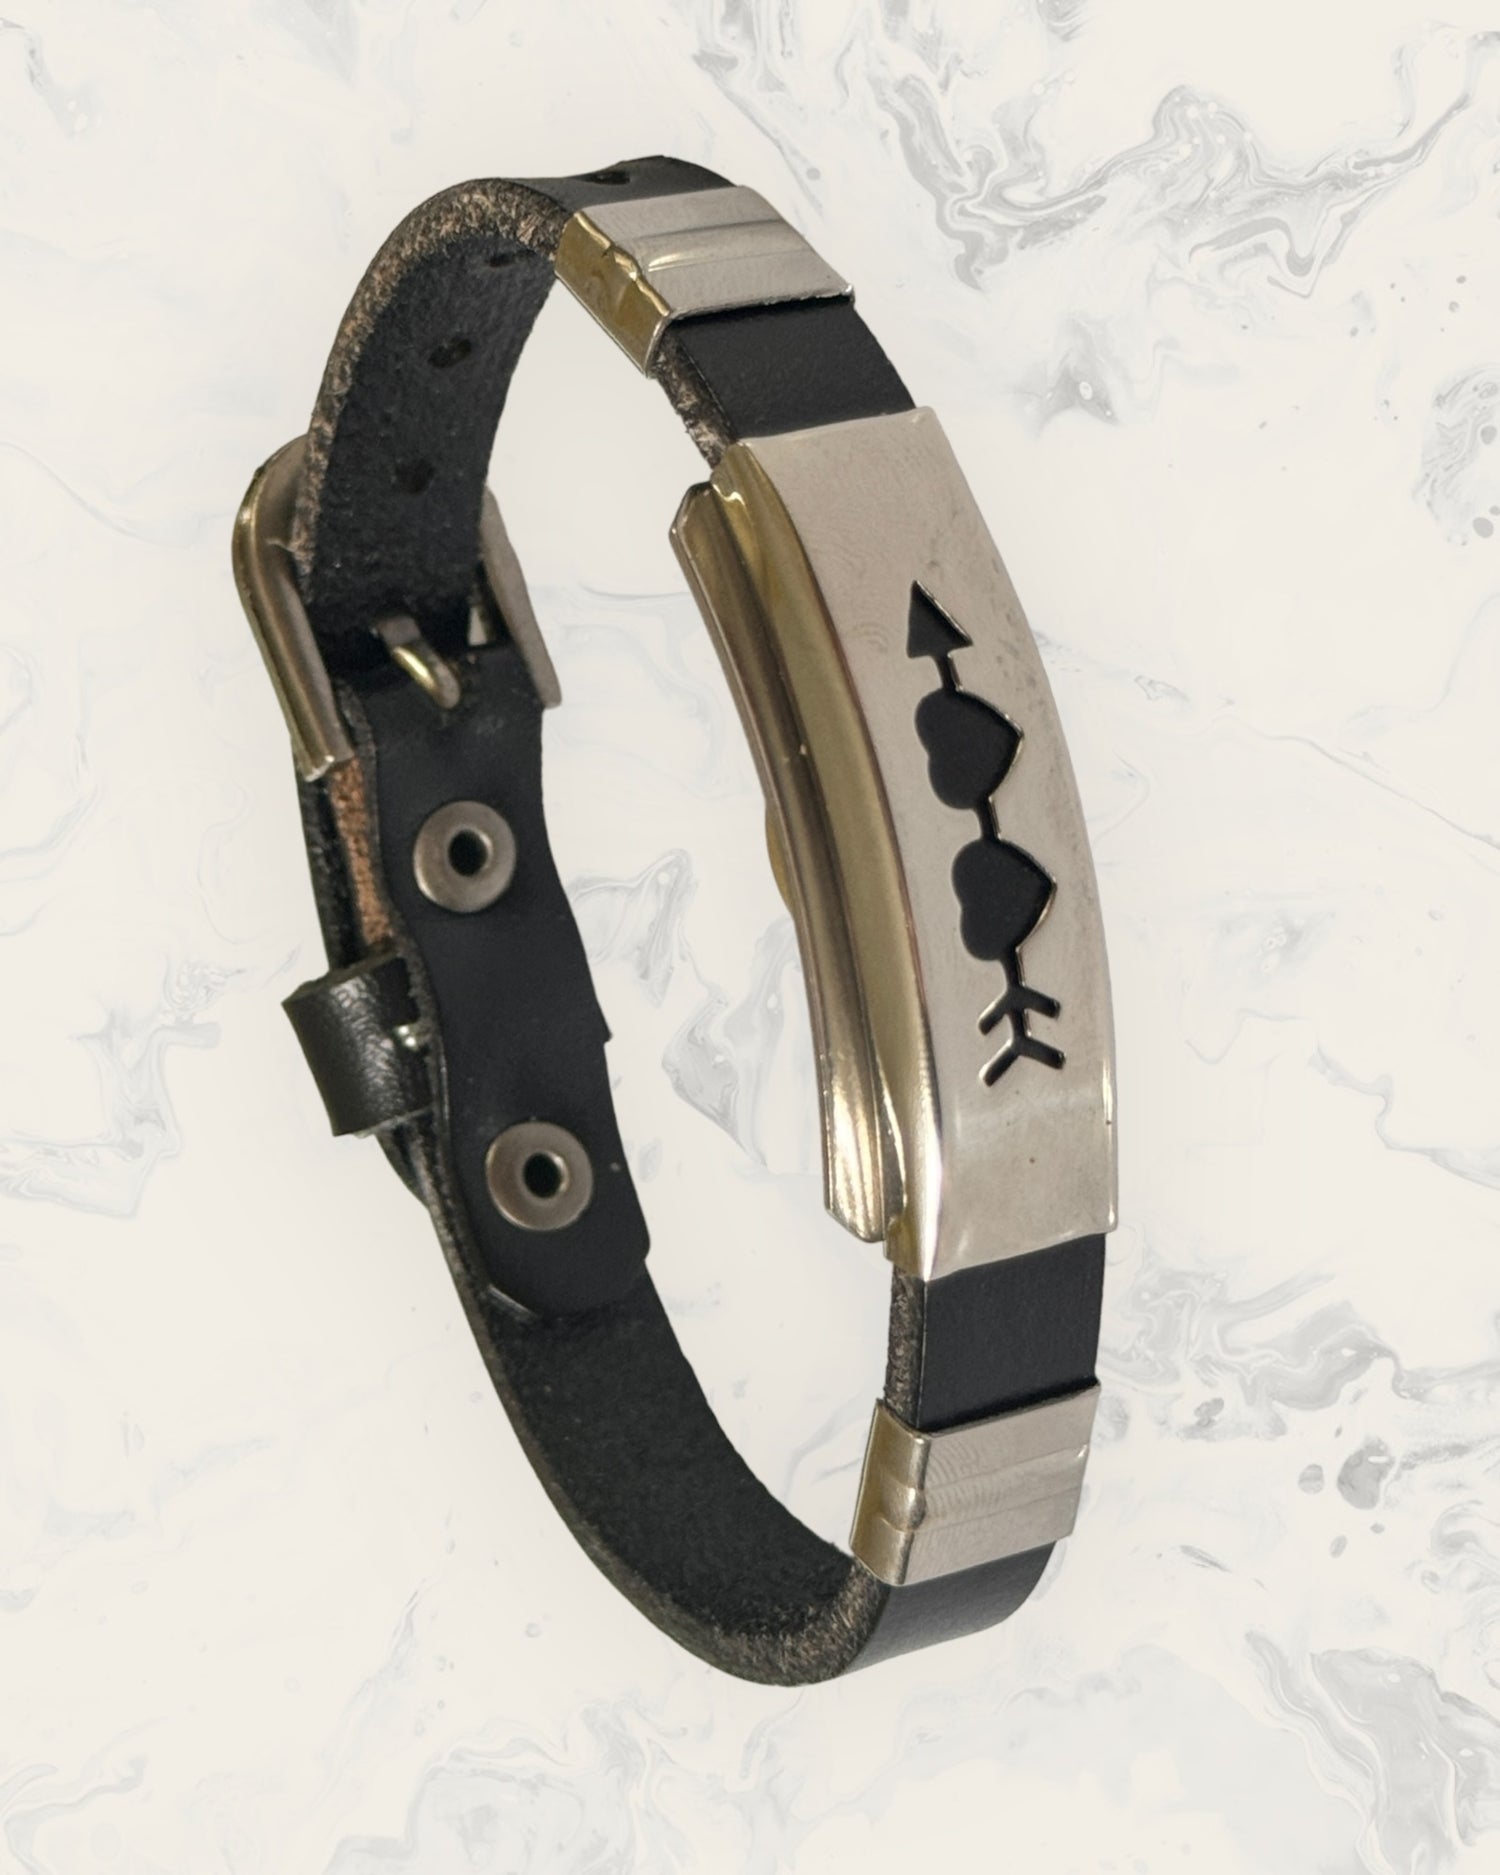 Natural Pain Relief and EMF Protection Bracelet Leather Band Color Black with Two Hearts and an arrow design on a silver metal slider